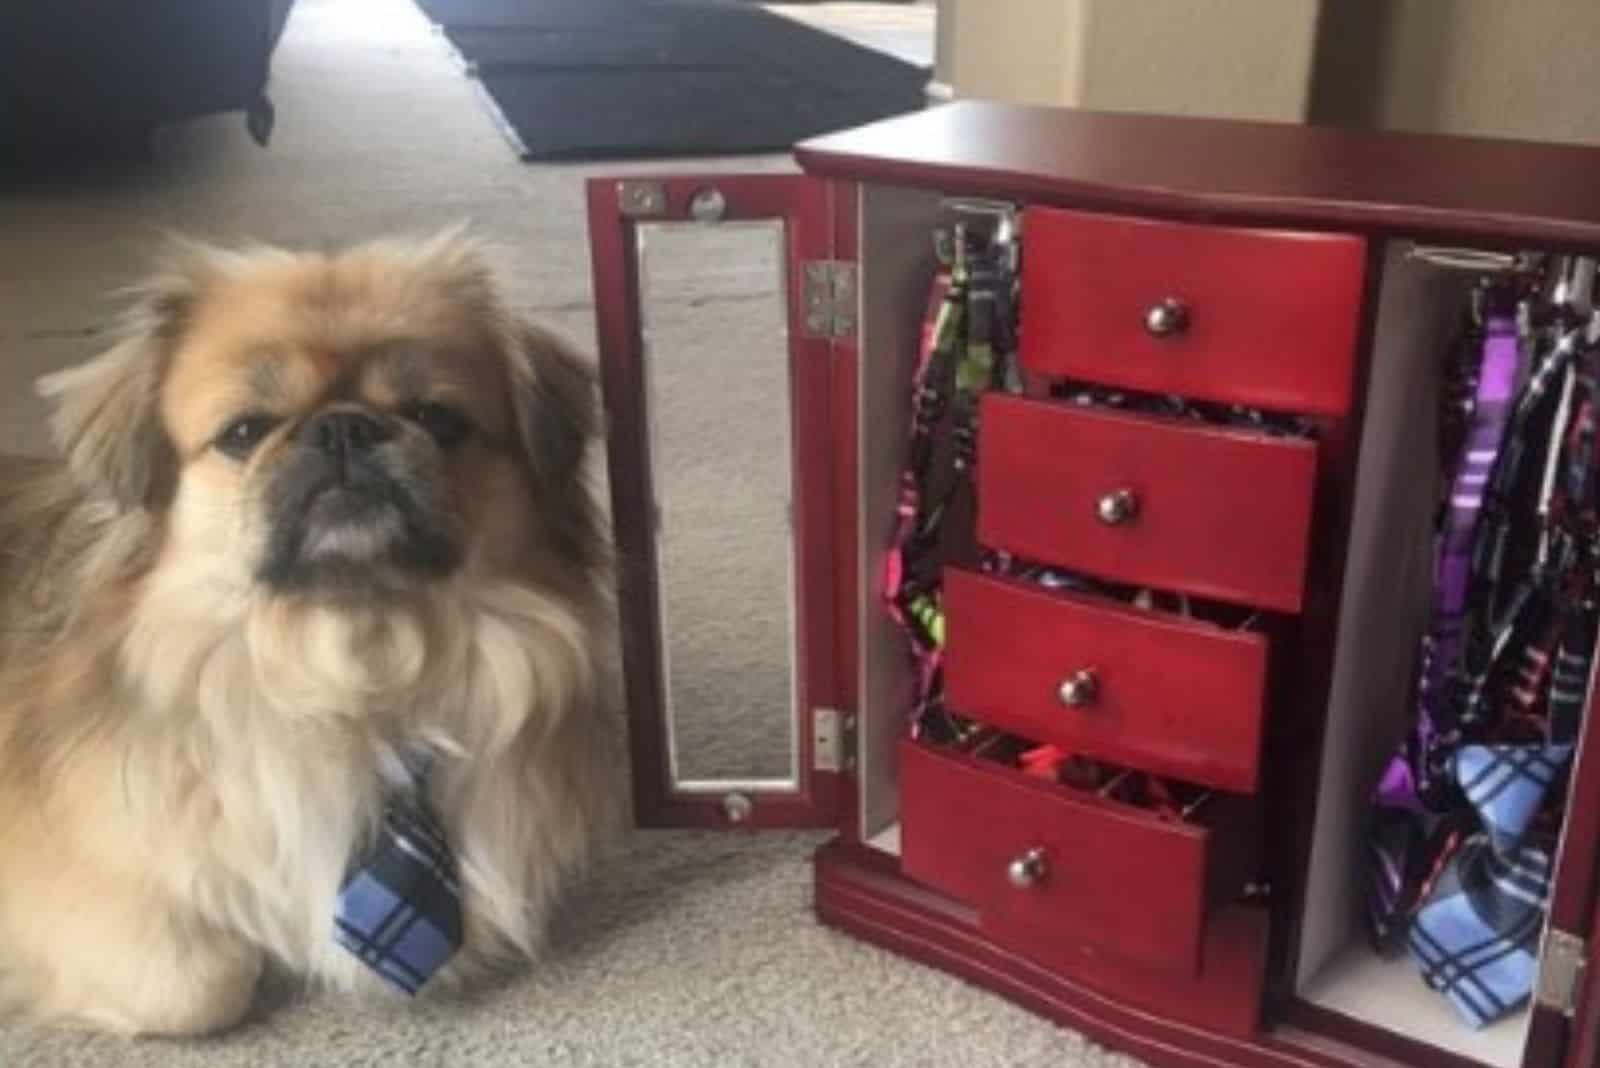 dog wearing a tie sitting beside his own tie collection